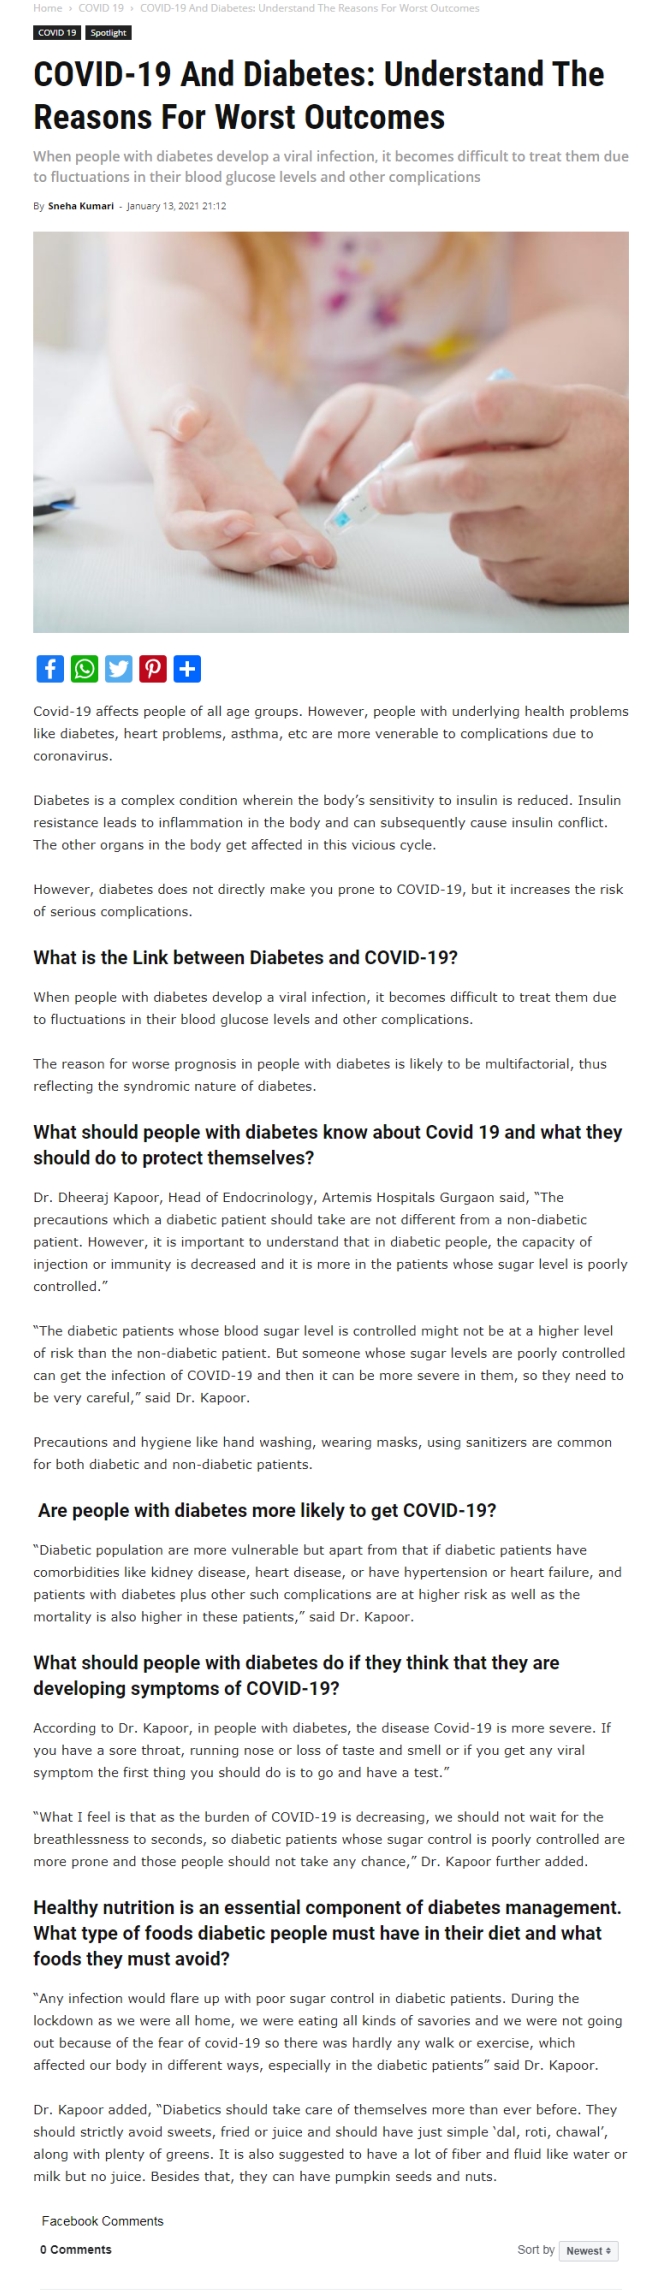 covid-19-and-diabetes-understand-the-reasons-for-worst-outcomes